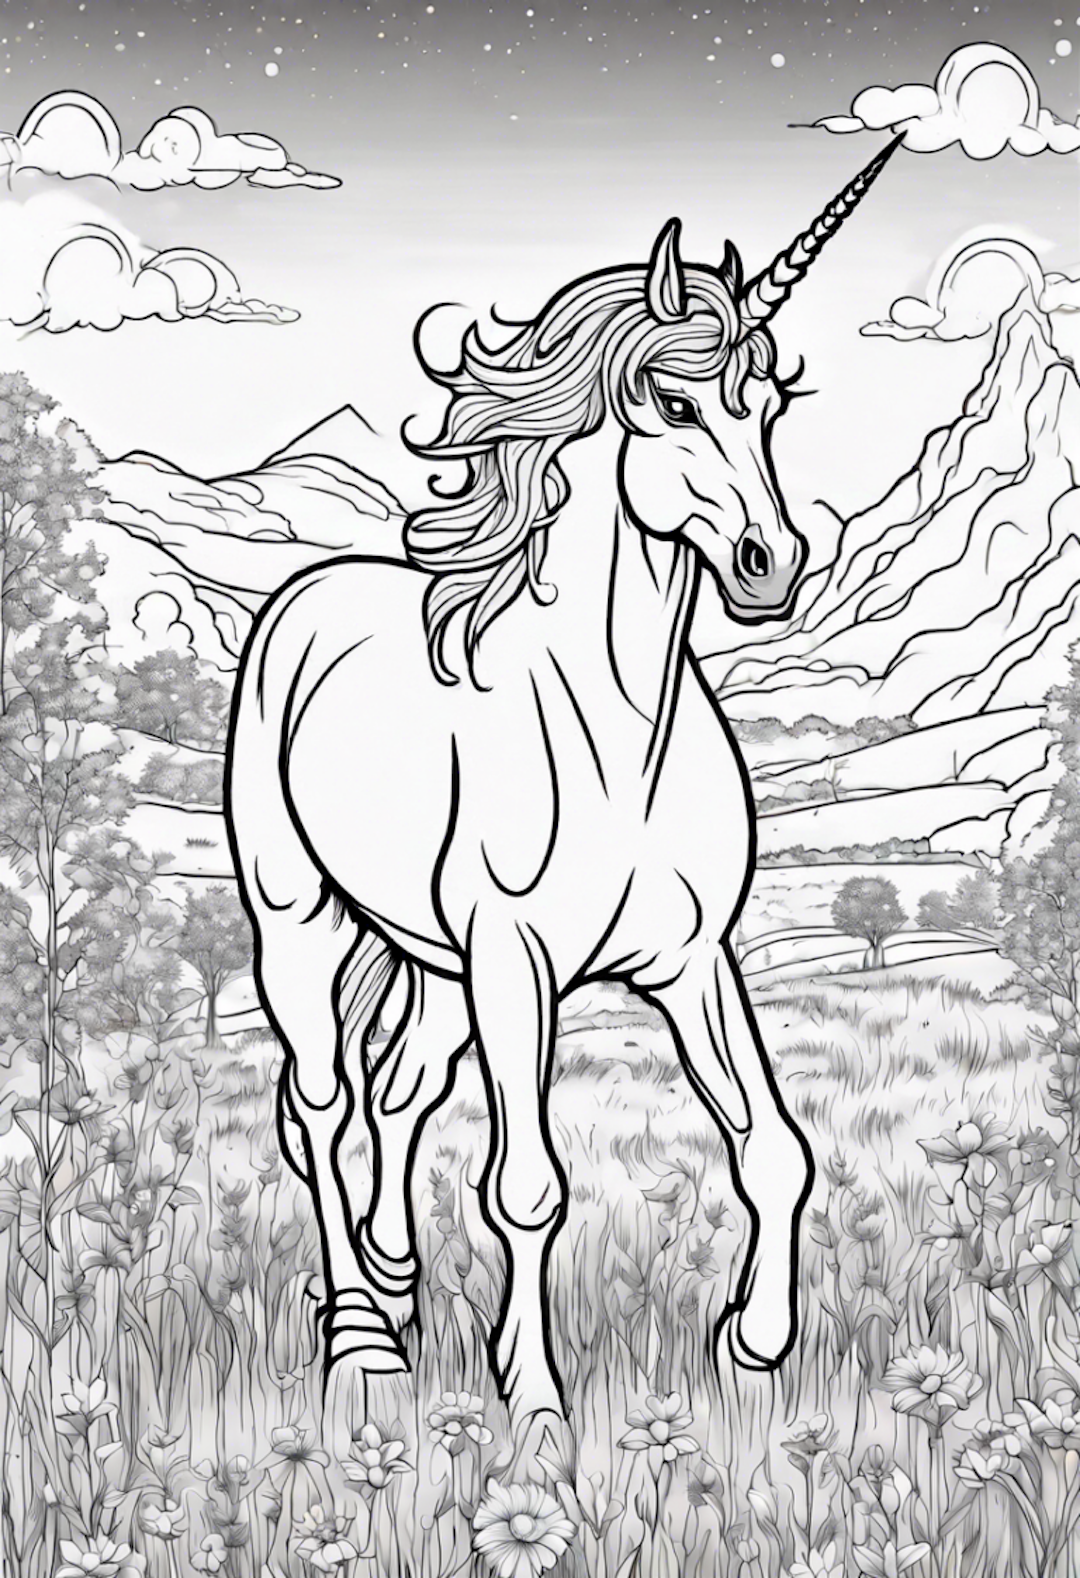 Mystical Unicorn In A Meadow coloring pages